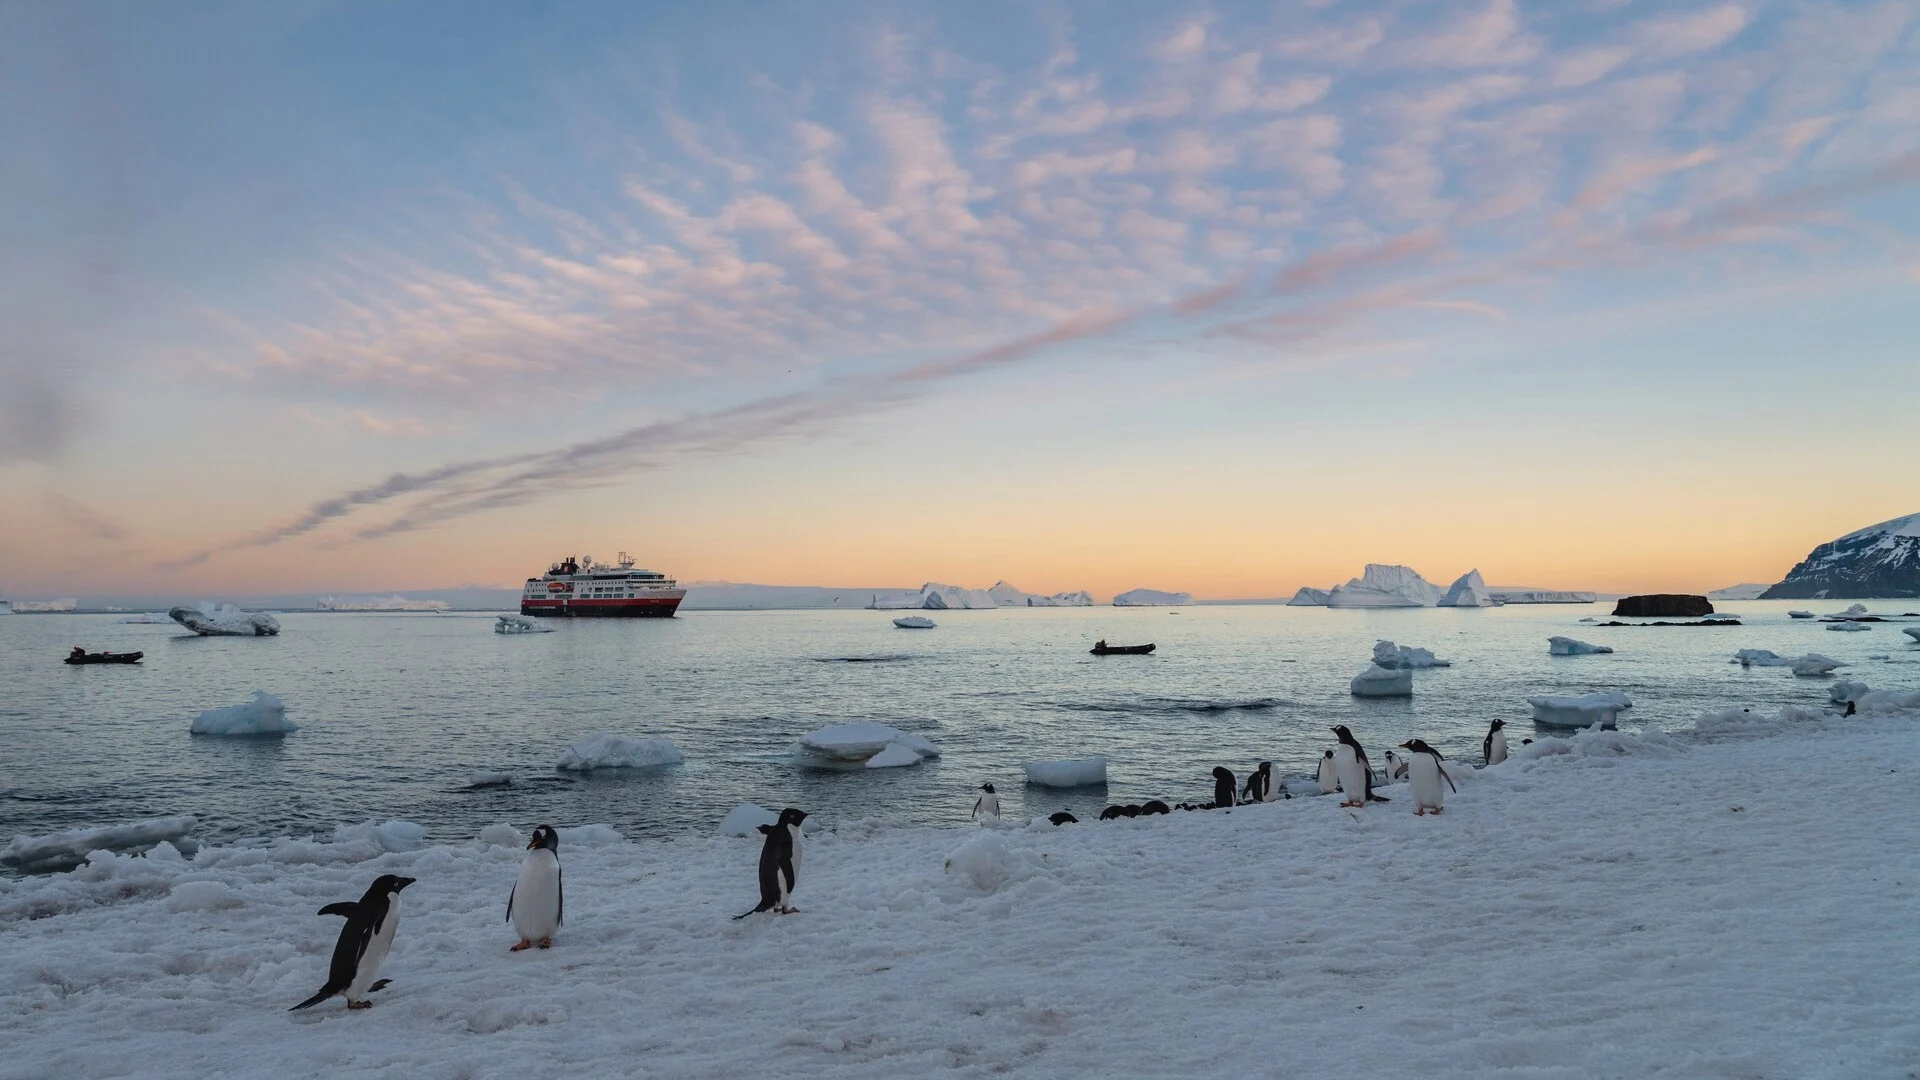 Penguins waddling across the snow in front of MS Fram anchored in Brown Bluff, Antarctica. Credit: Yuri Choufour.